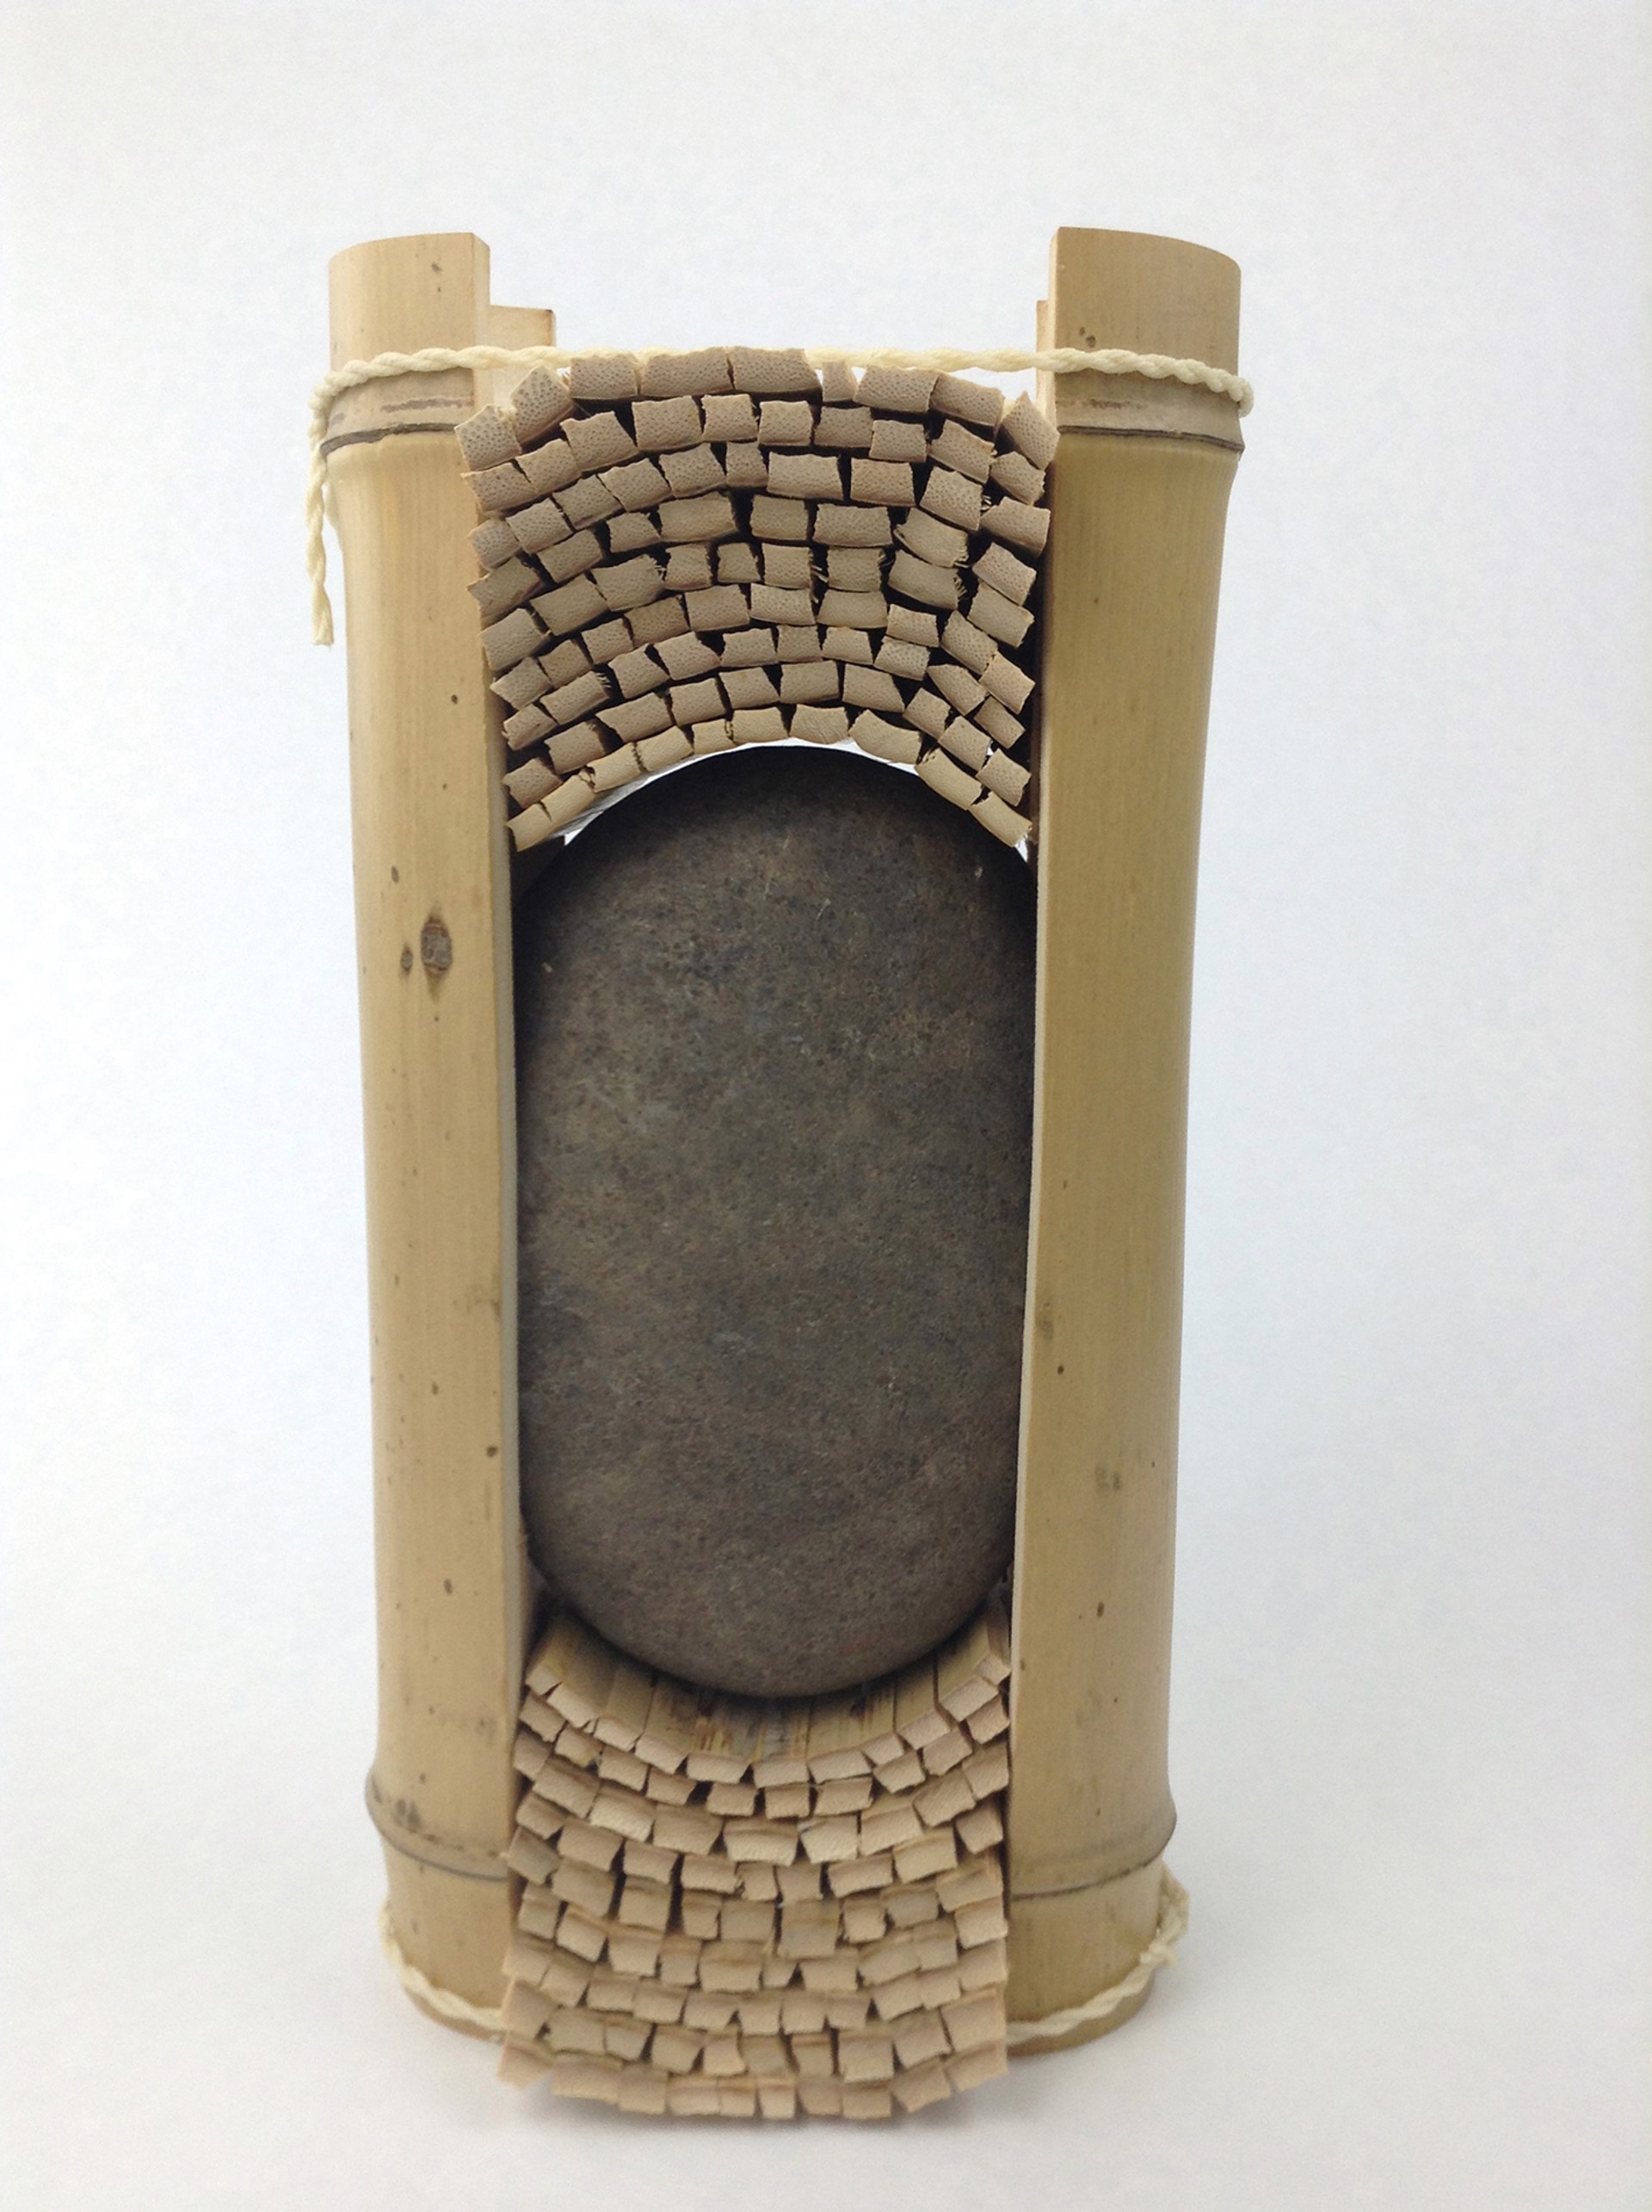 Reliquary for Stone by Charissa Brock